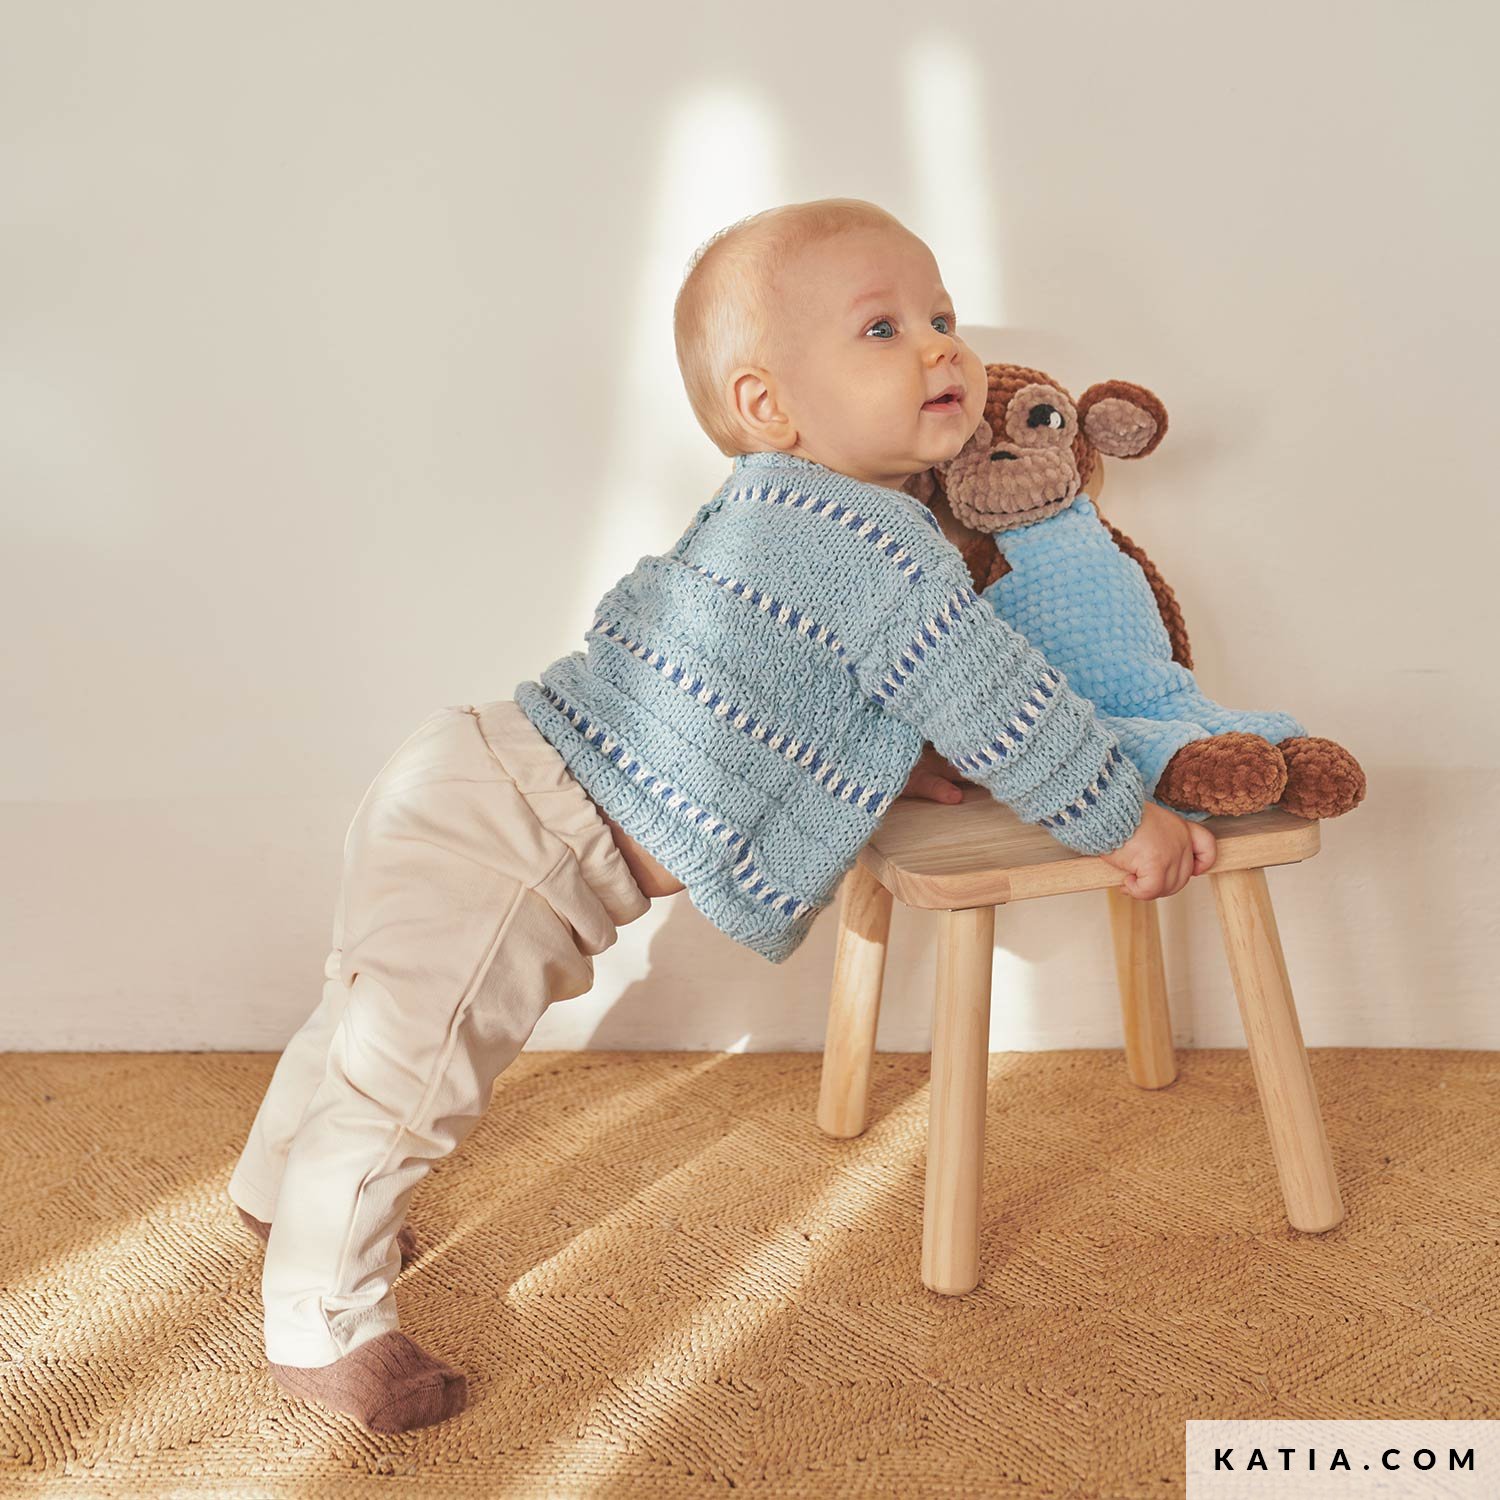 5 gifts ideas to knit for a new baby